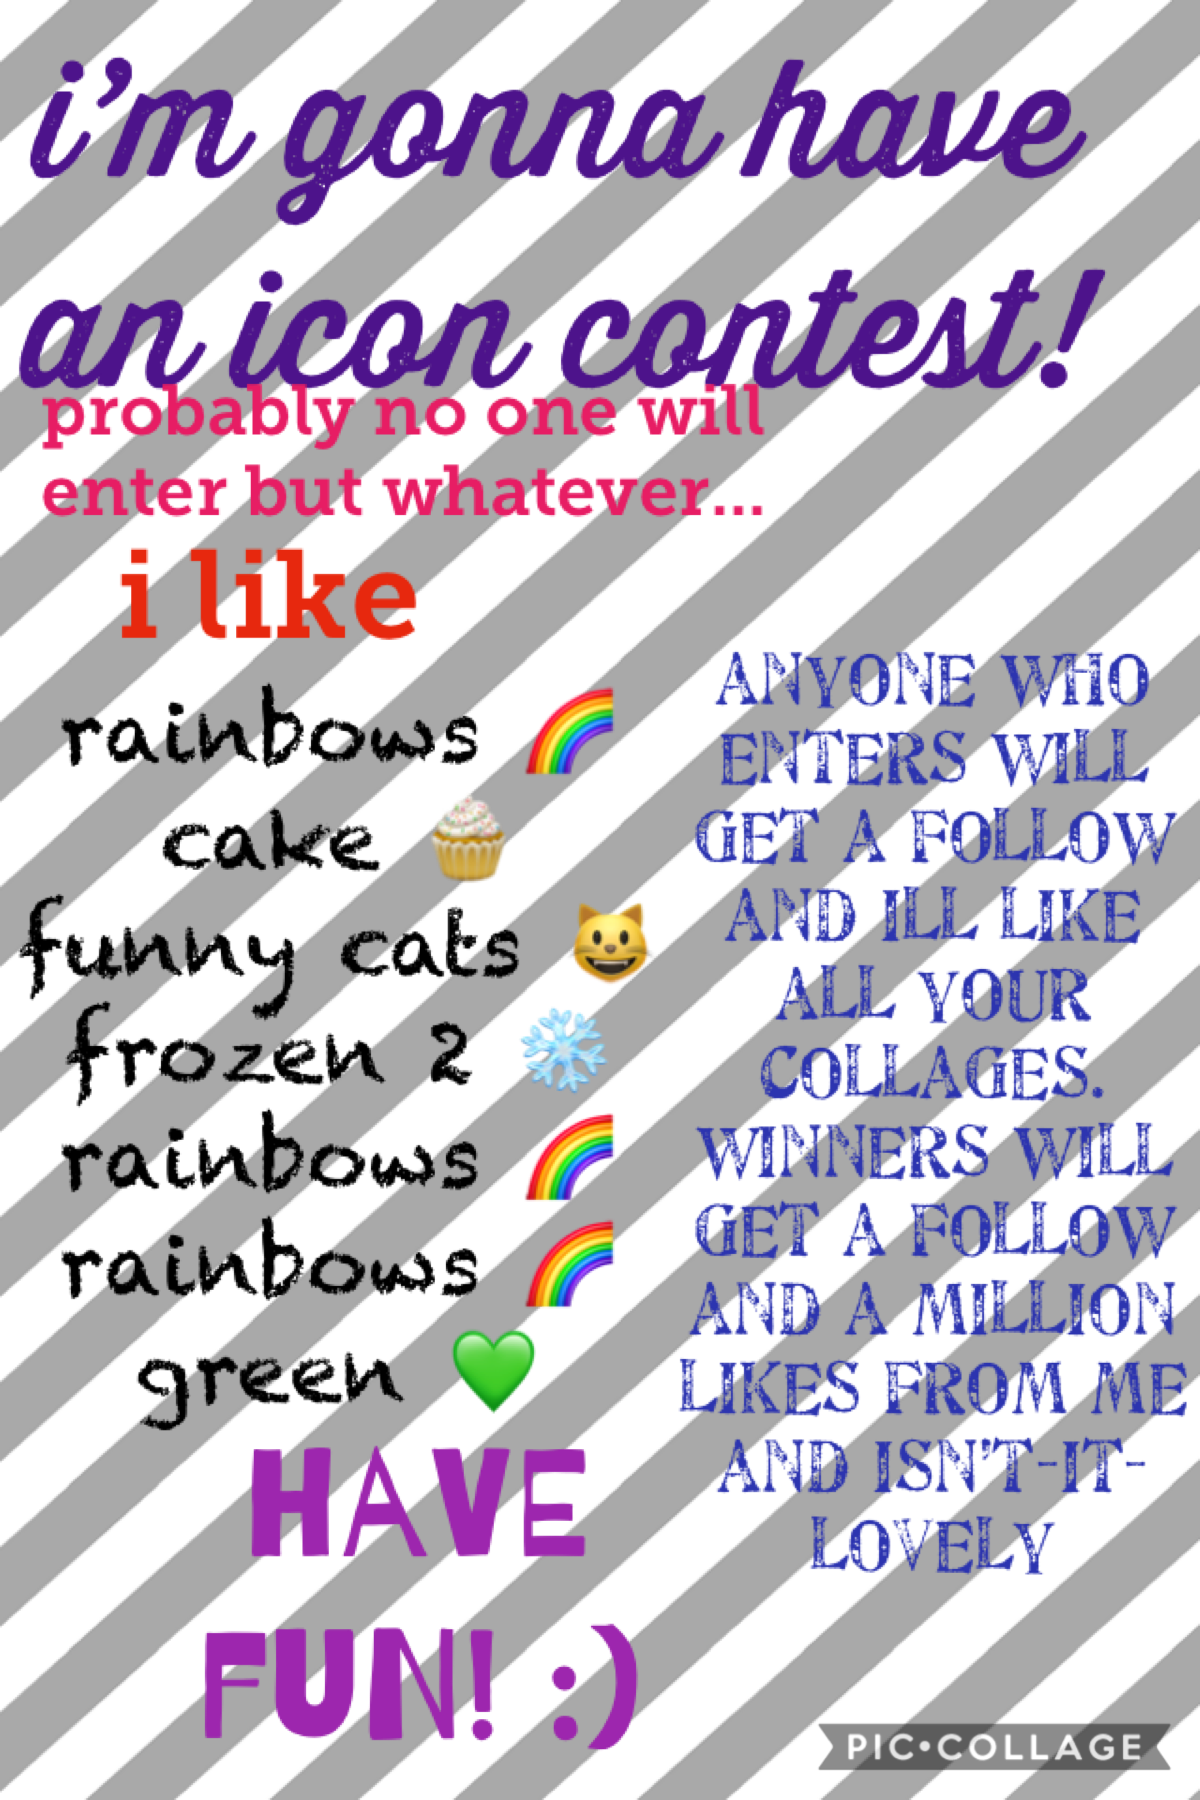 🌈tap🌈 
icon contest! 
pls enter!
yay!